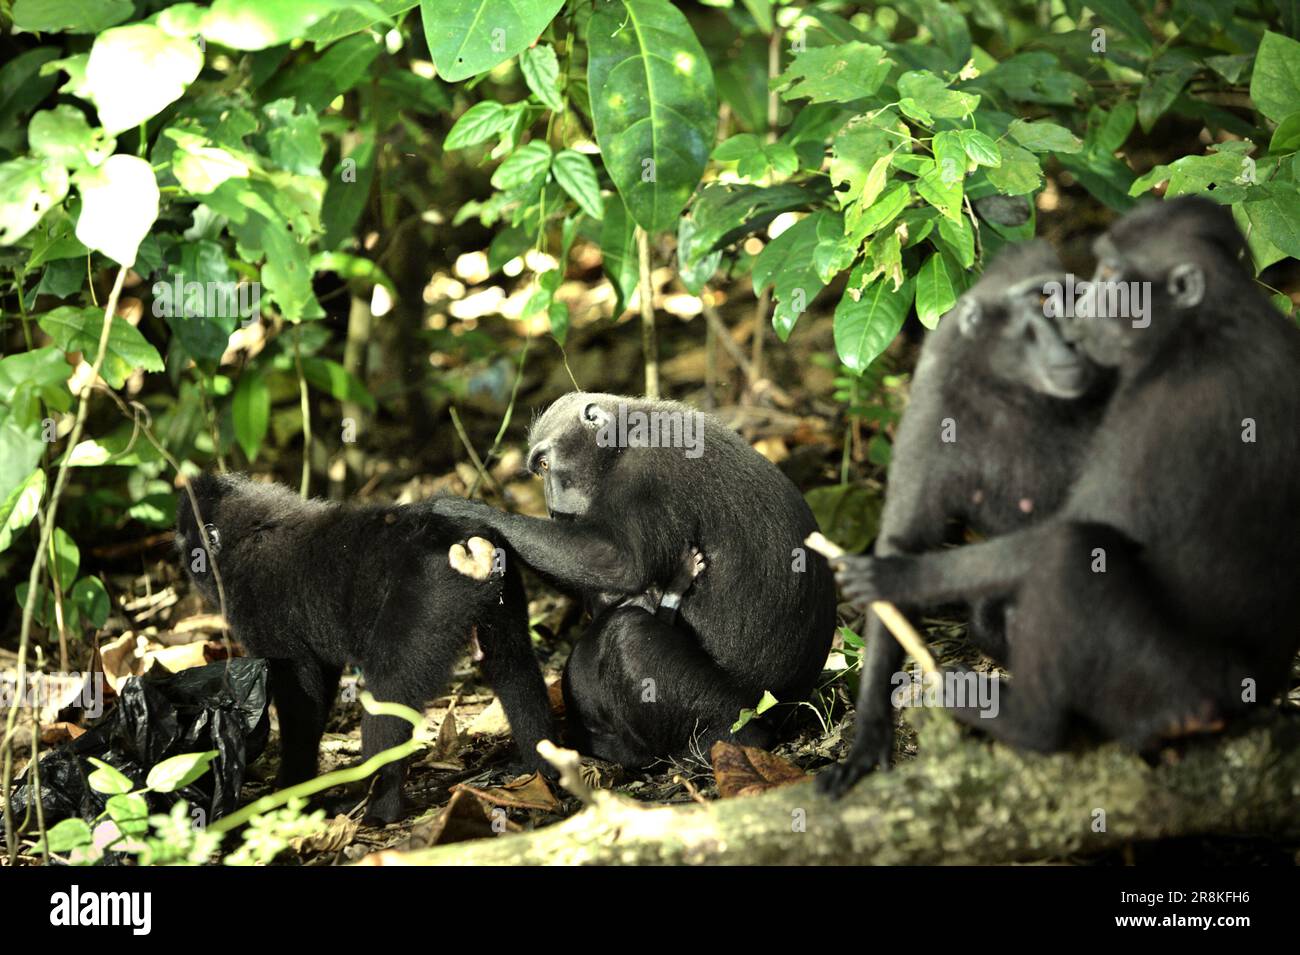 Sulawesi black-crested macaques (Macaca nigra) are having social activities in Tangkoko Nature Reserve, North Sulawesi, Indonesia. Climate change may reduce the habitat suitability of primate species, that could force them to move out of safe habitats and face more potential conflicts with human, scientists say. Stock Photo